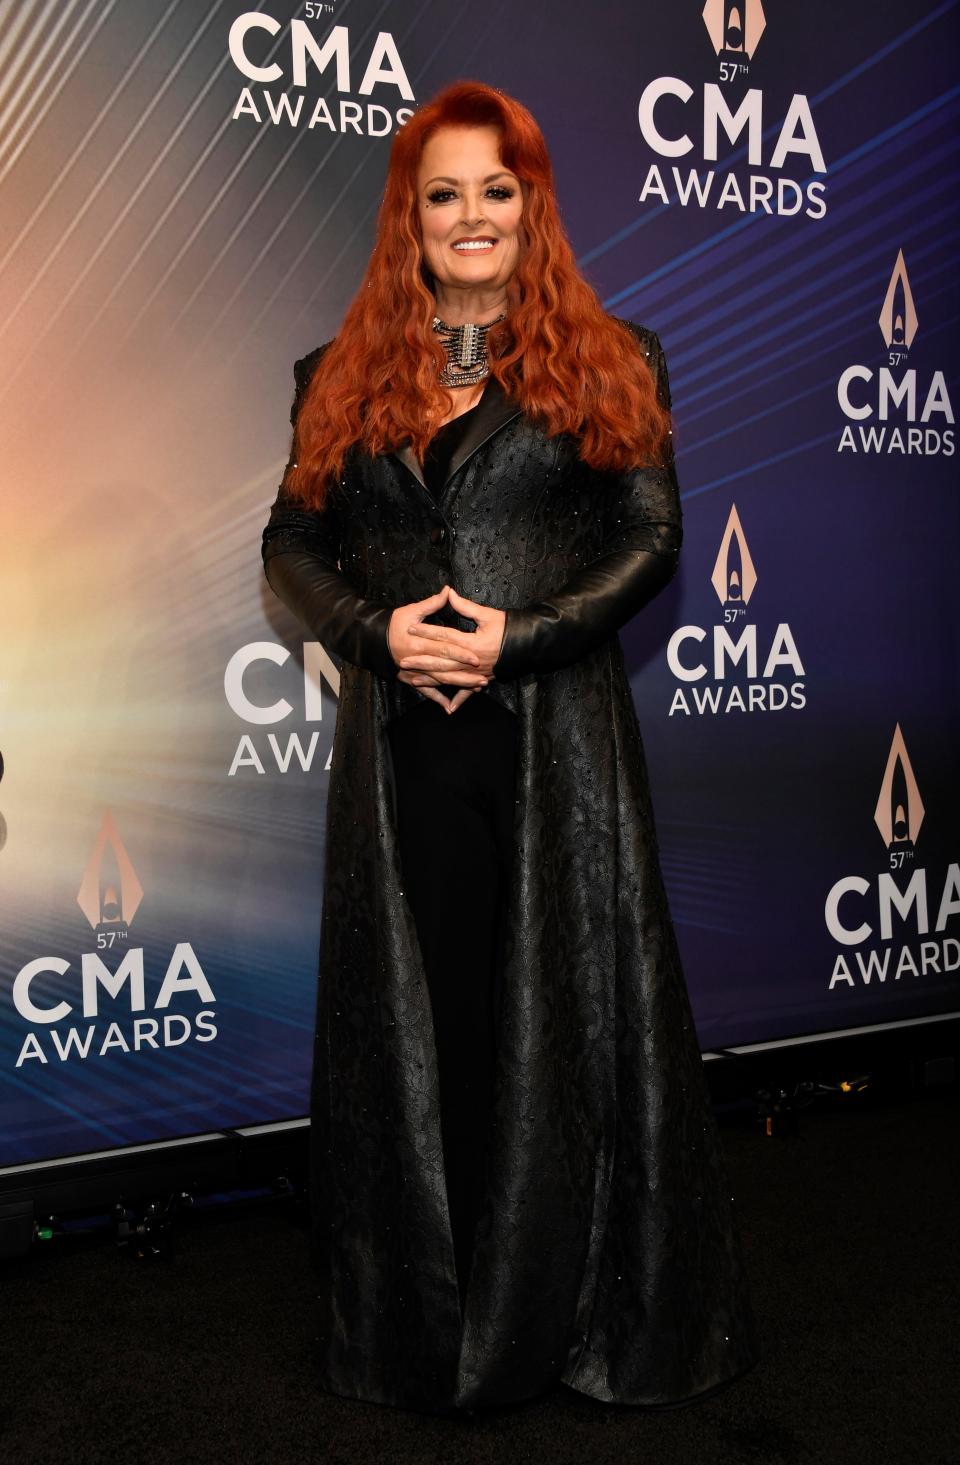 Wynonna Judd on opening CMA Awards performance with rising star Jelly